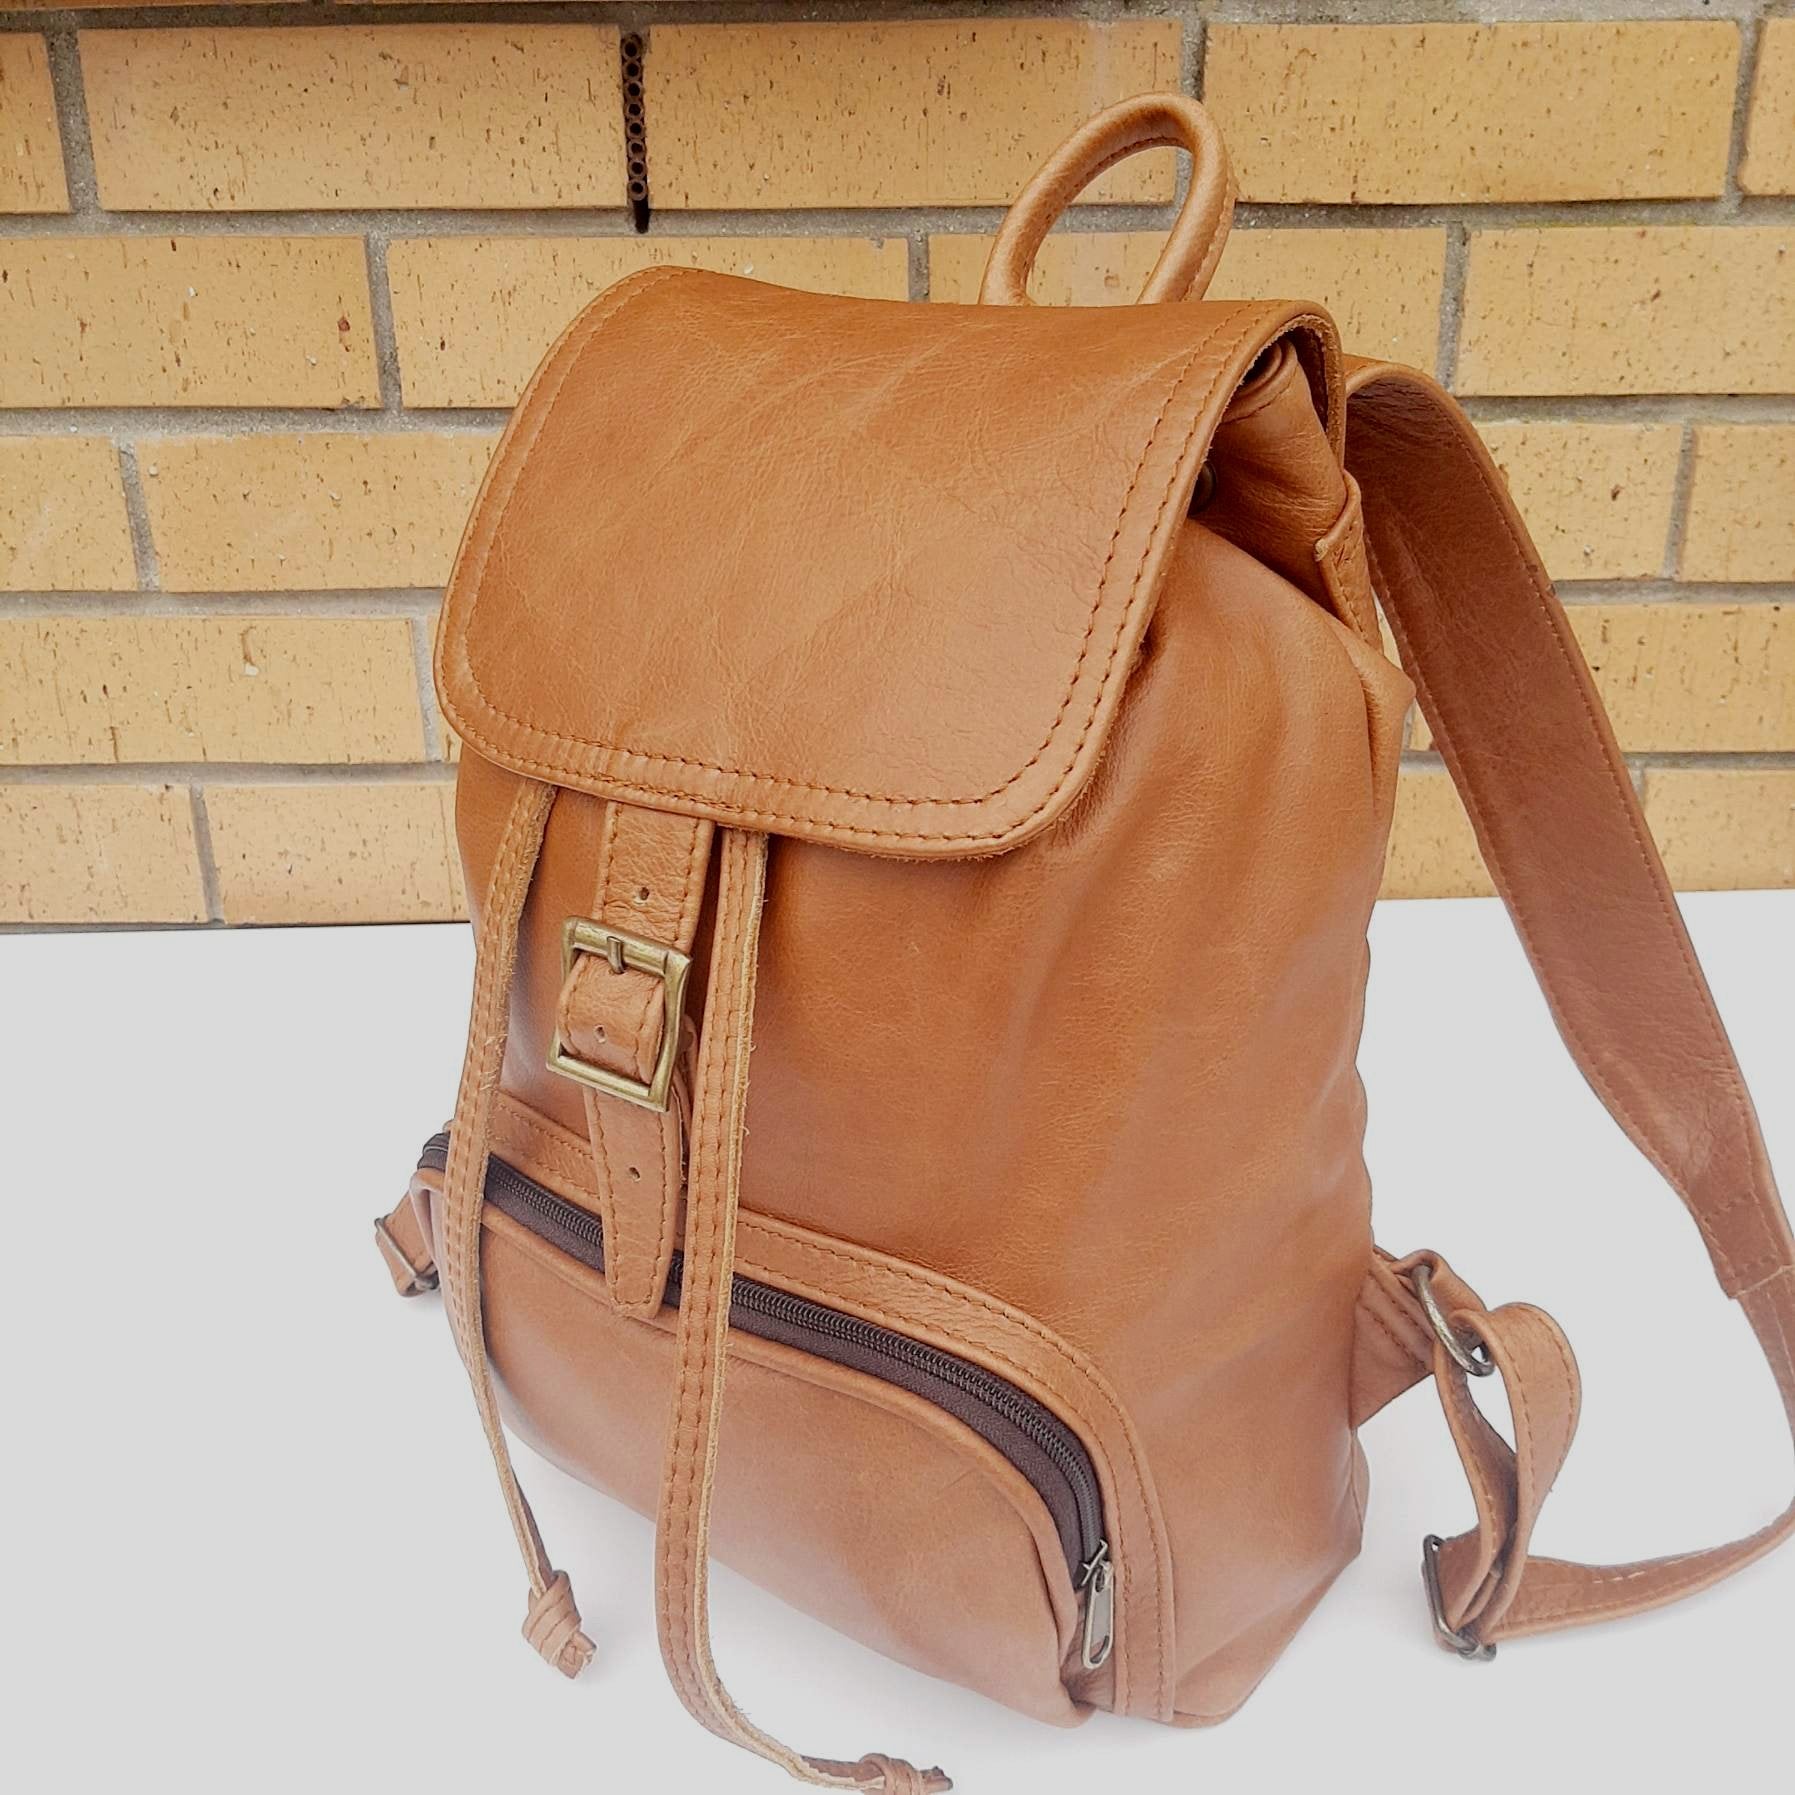 leather backpacks flap in ginger tan colour made by Cape Masai Leather